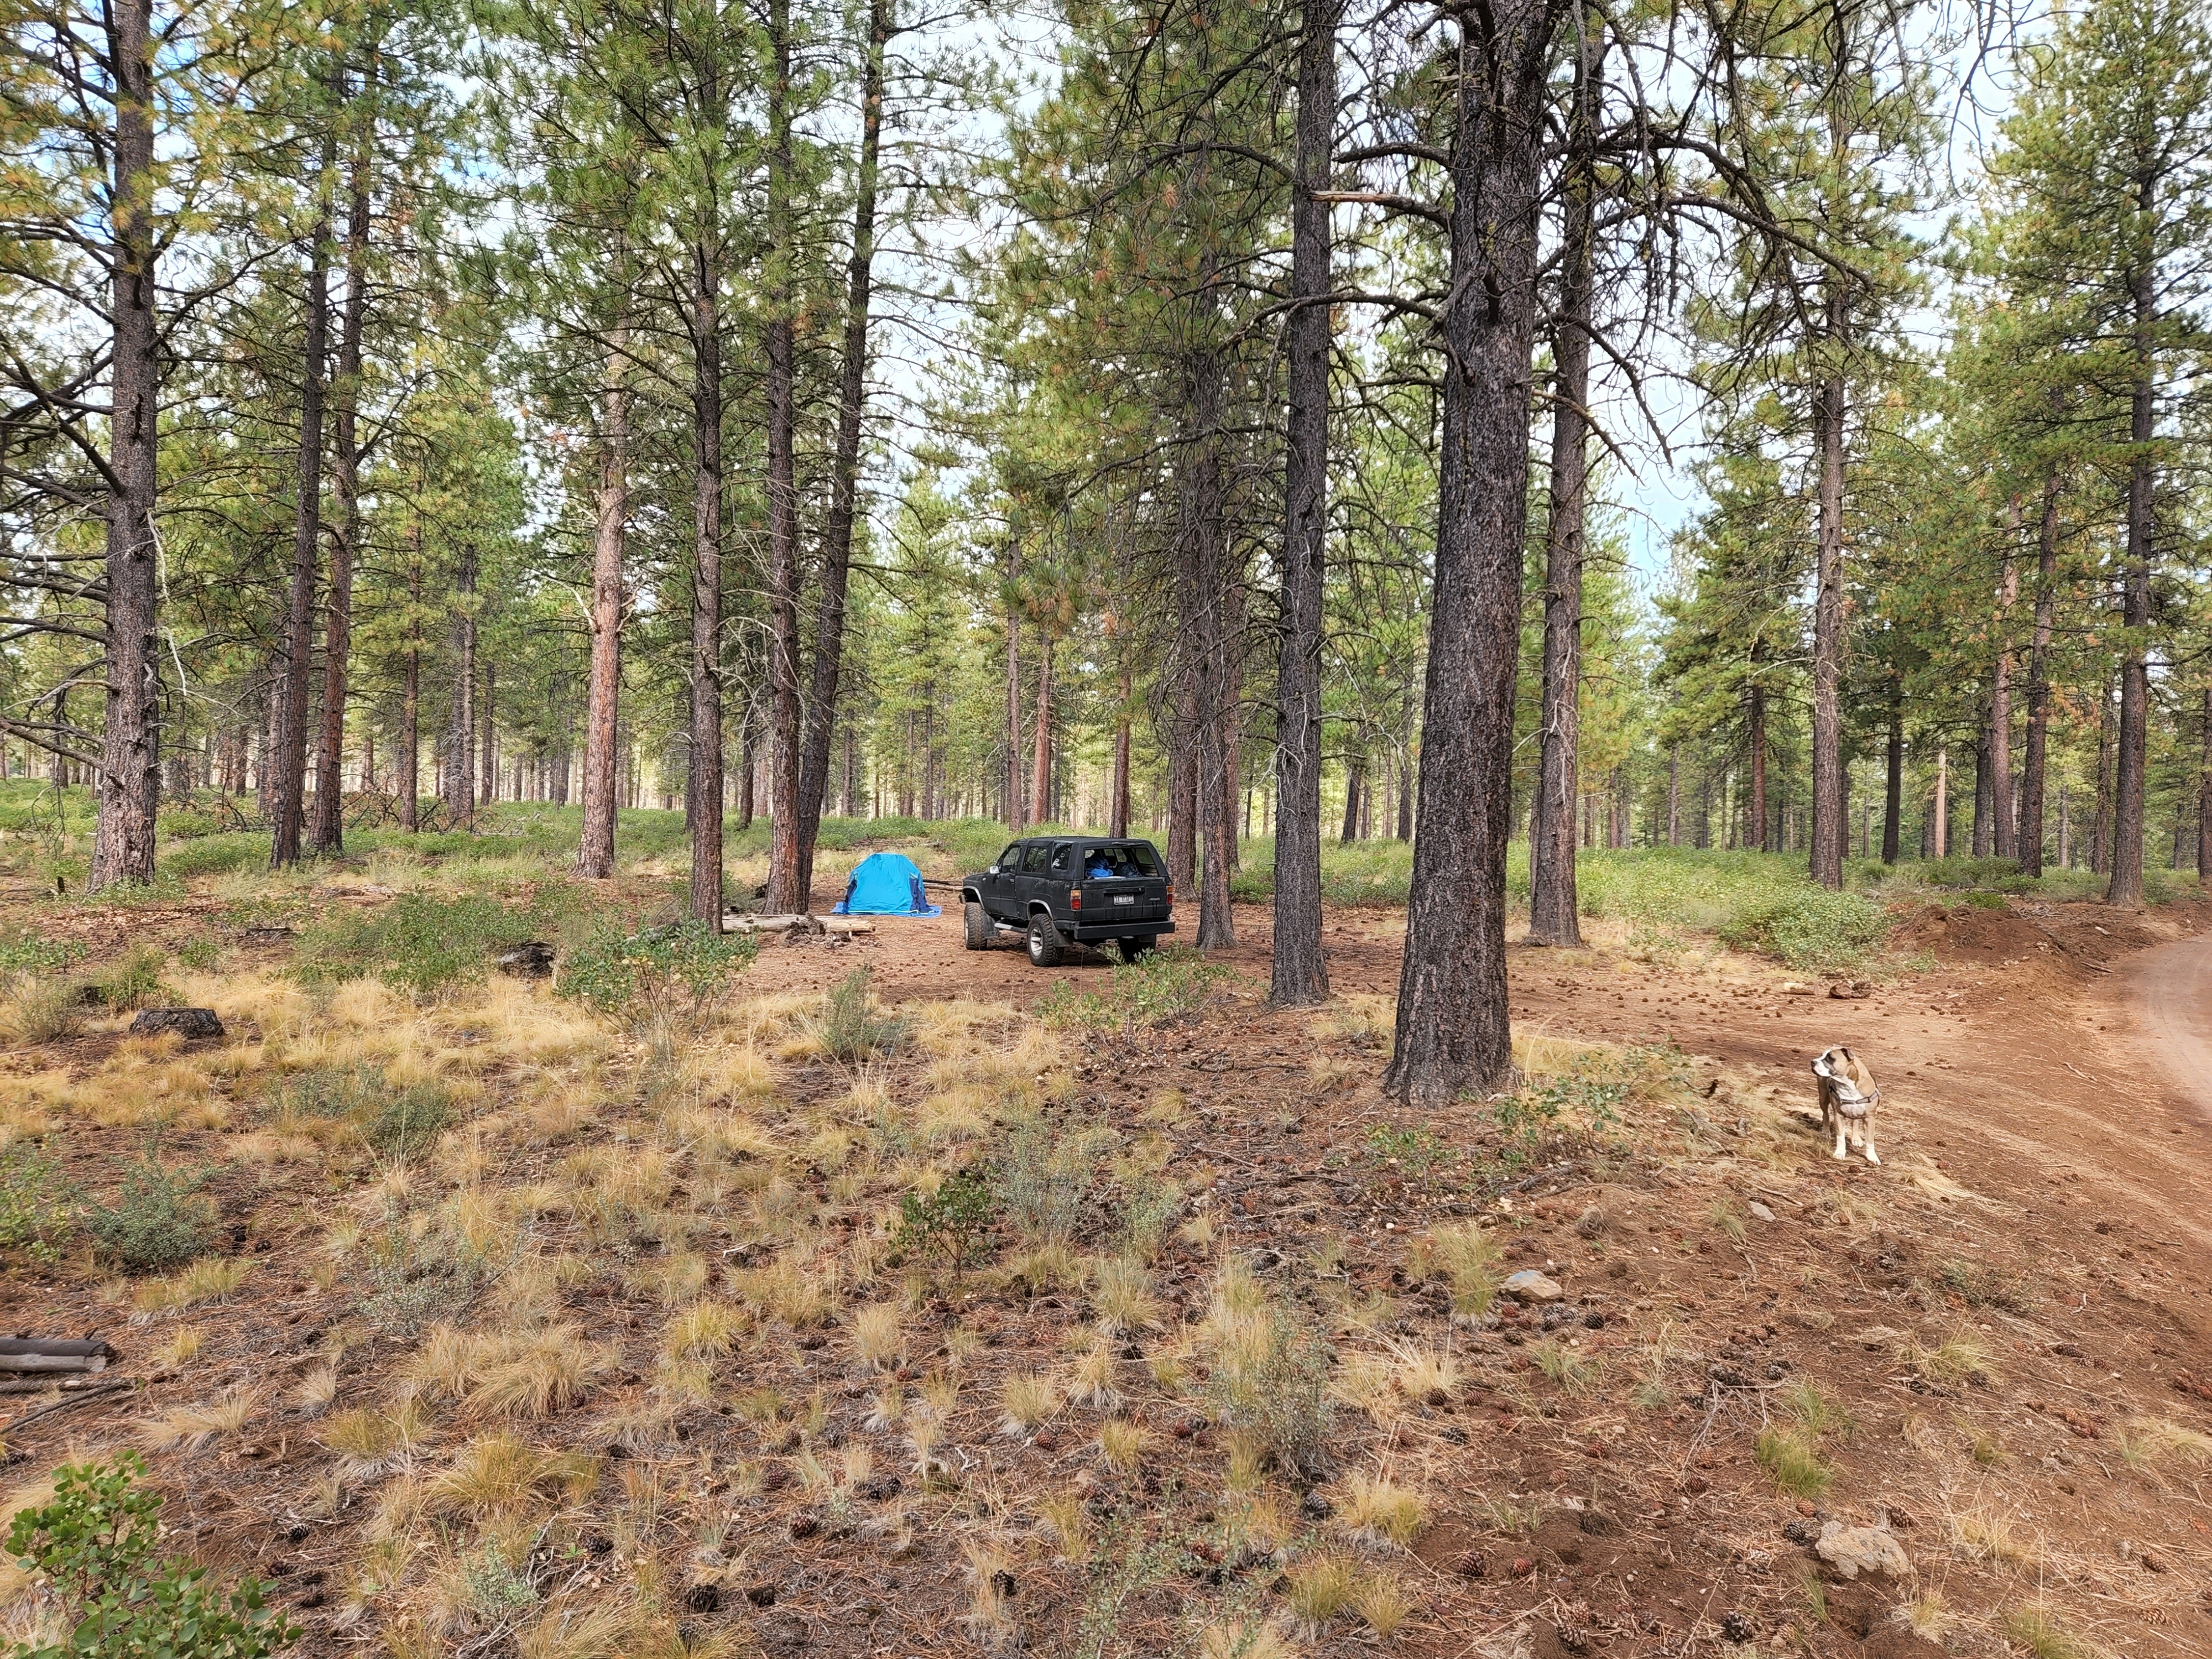 Camper submitted image from NF 4610 Roadside Dispersed Camping - 1